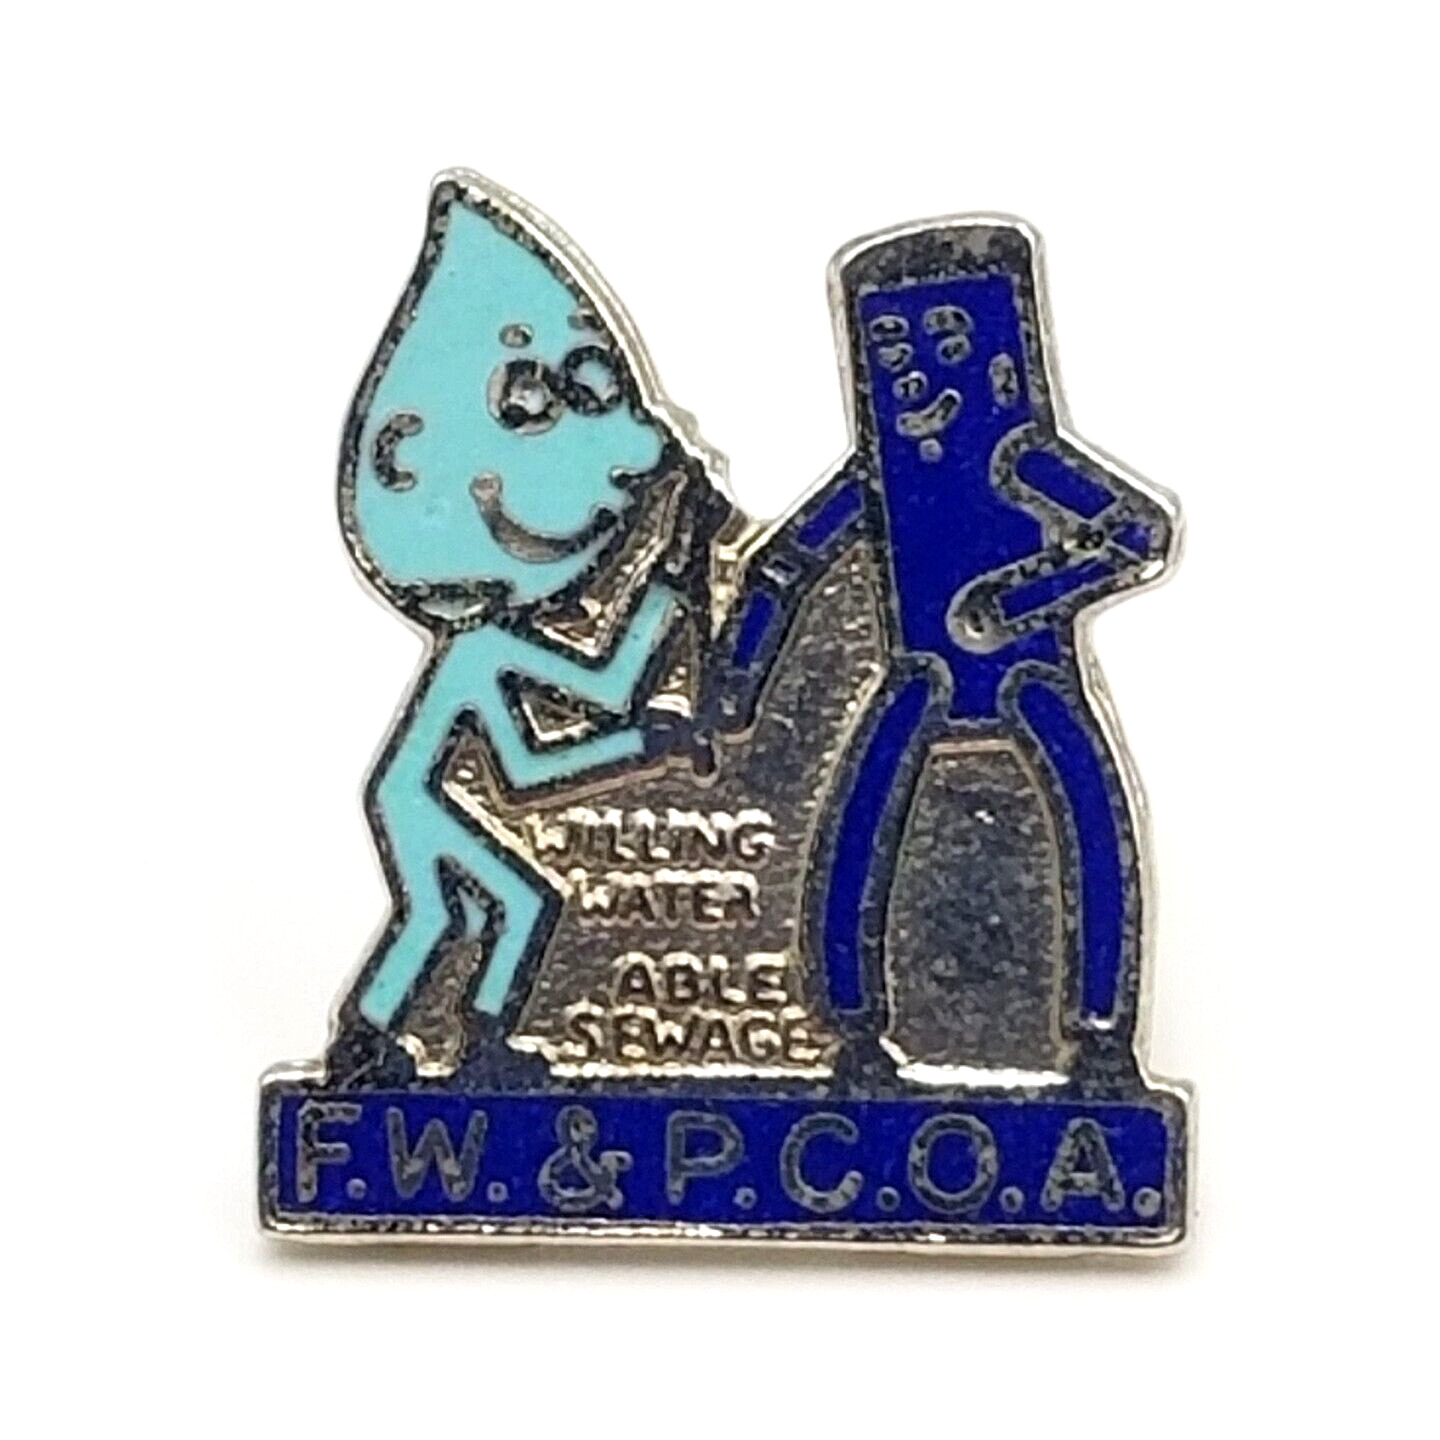 Vintage FW & PCOA Willing Water Able Sewage Enamel Lapel Pin Blue Silver tone